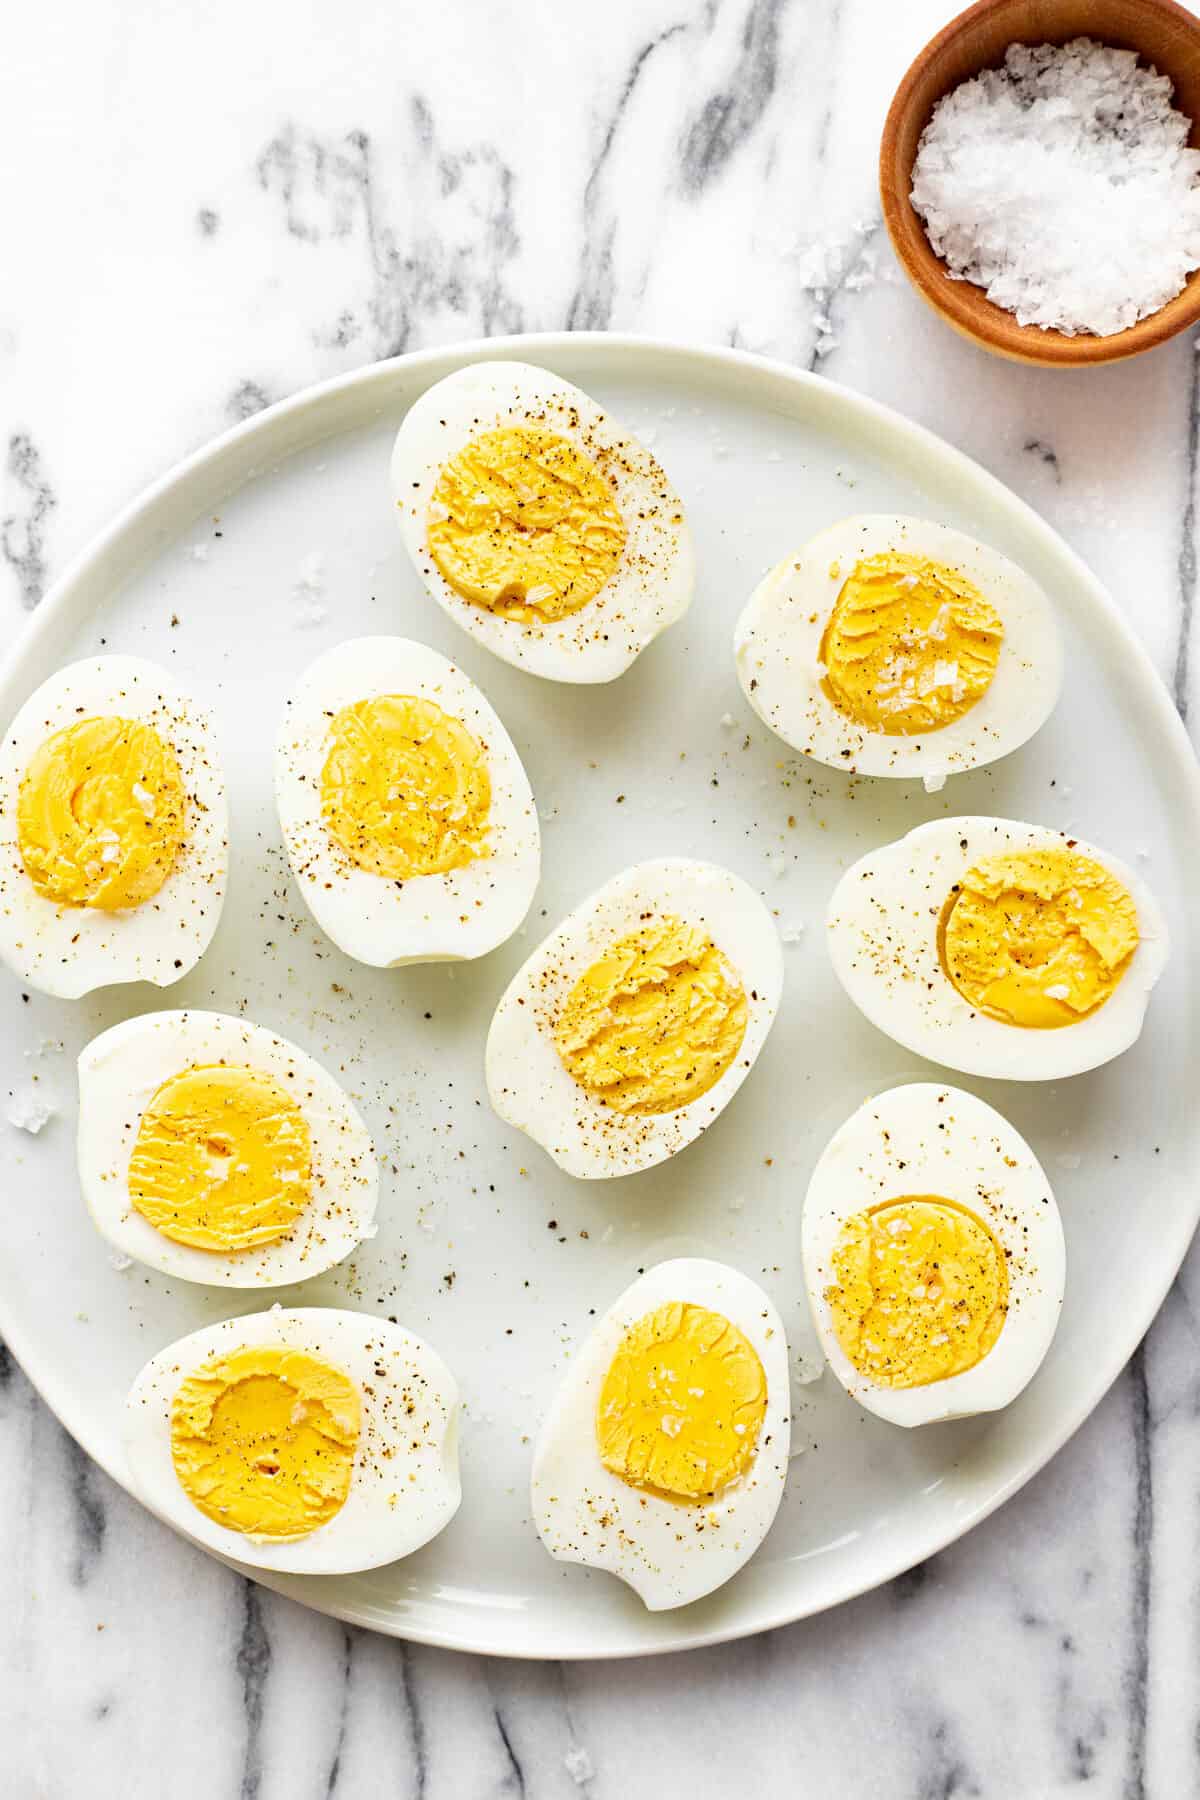 White plate with sliced hard boiled eggs garnished with salt and pepper.